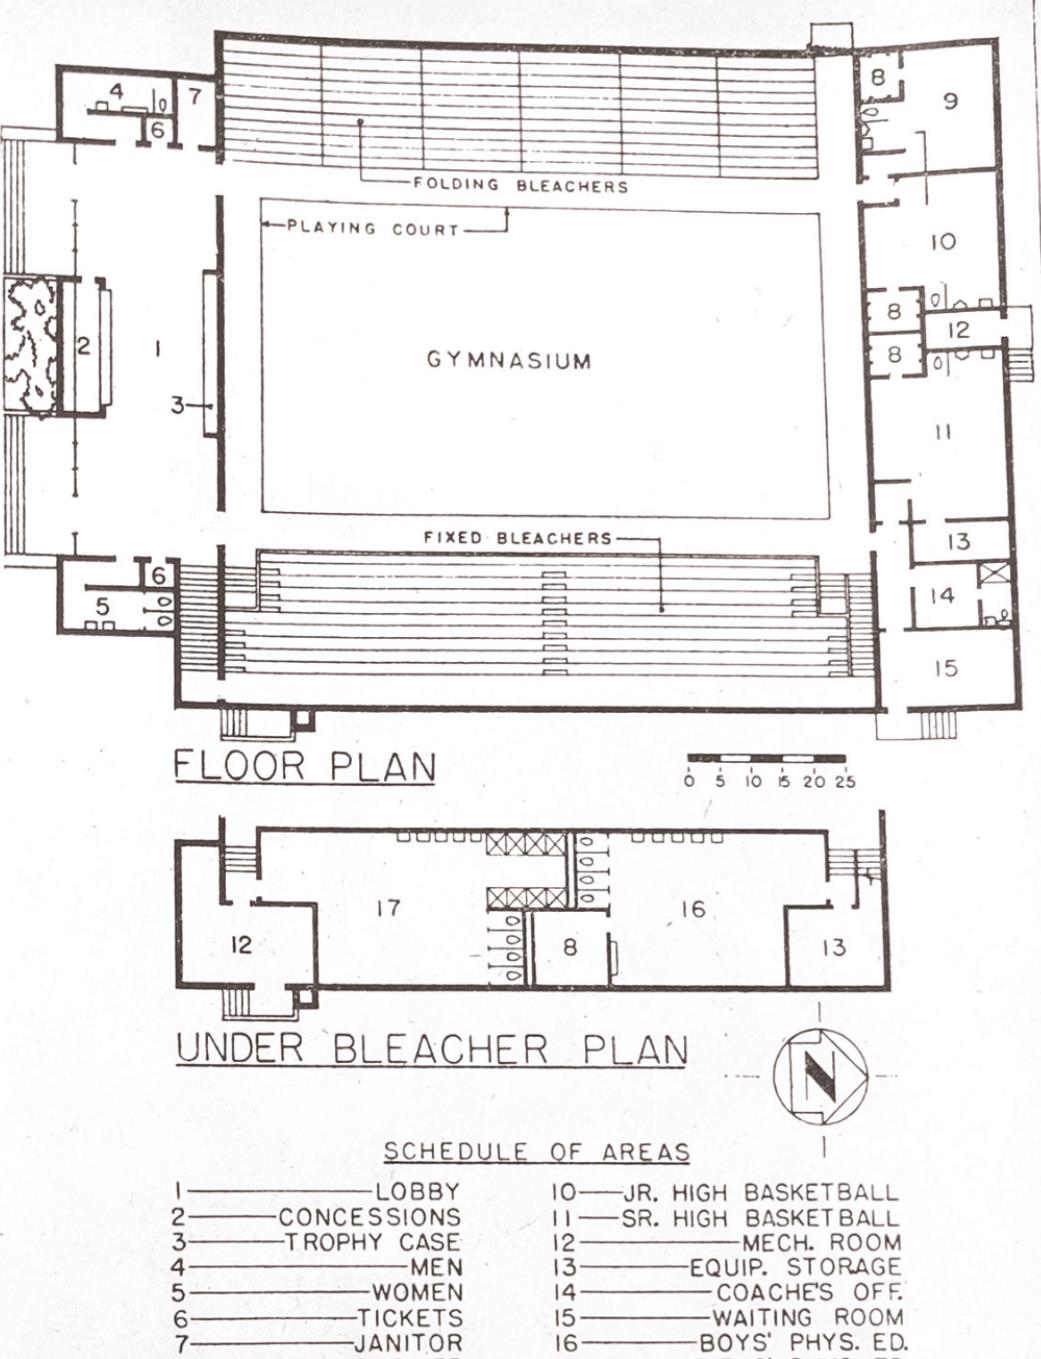 Pictured right is the floor plans for the rebuilding of the Weatherford High School gymnasium, which was destroyed during a fire earlier in the year. These plans can be found in the May 26, 1960 edition of the Weatherford Daily News.